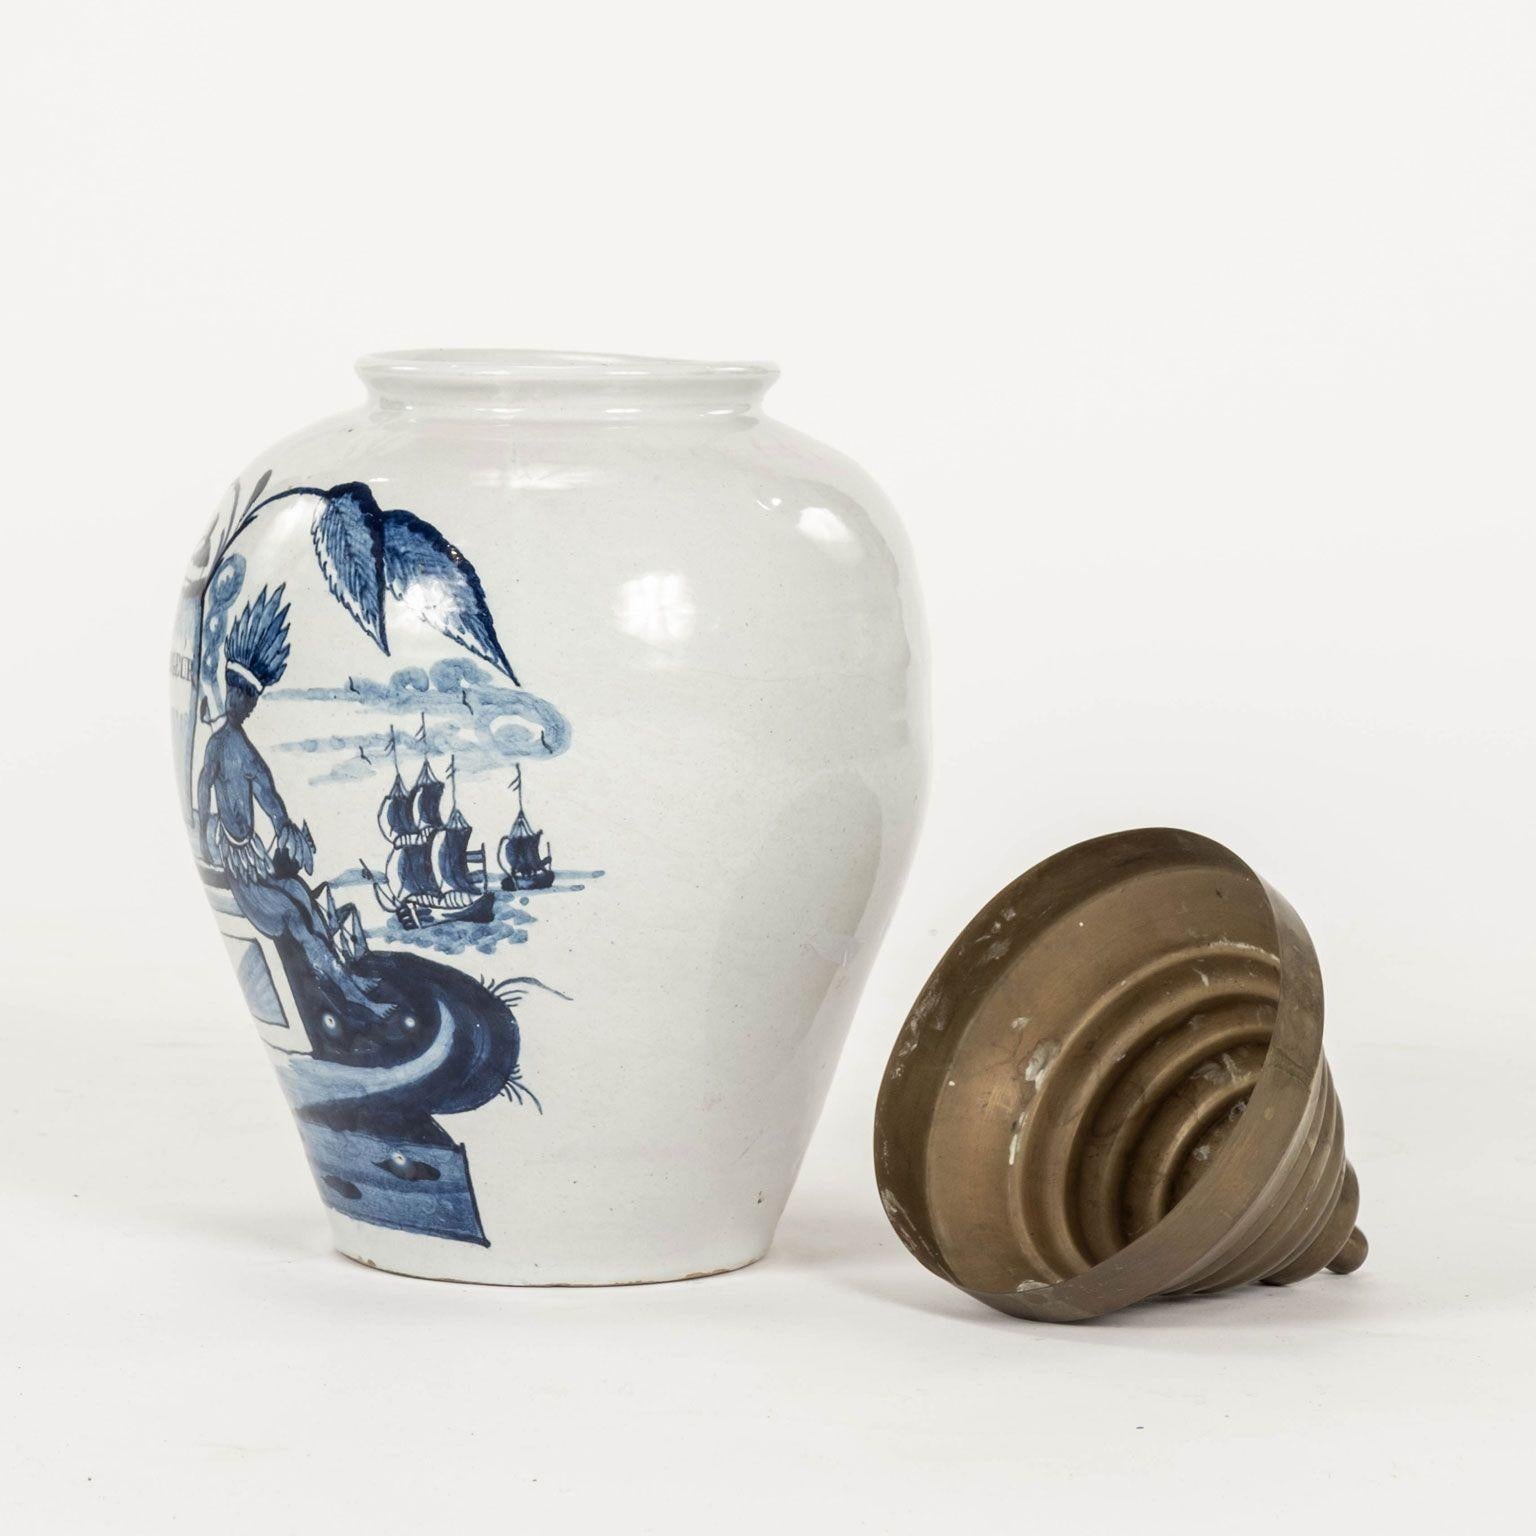 Delft blue and white “Rosegeur” urn-shape tobacco jar with lid, Netherlands, circa 1780. Inscribed “Rosegeur” and decorated with coastal scene and seated “Amerindian” figure. Rosegeur, or Rozengeur, refers to rose scented tobacco favored for use